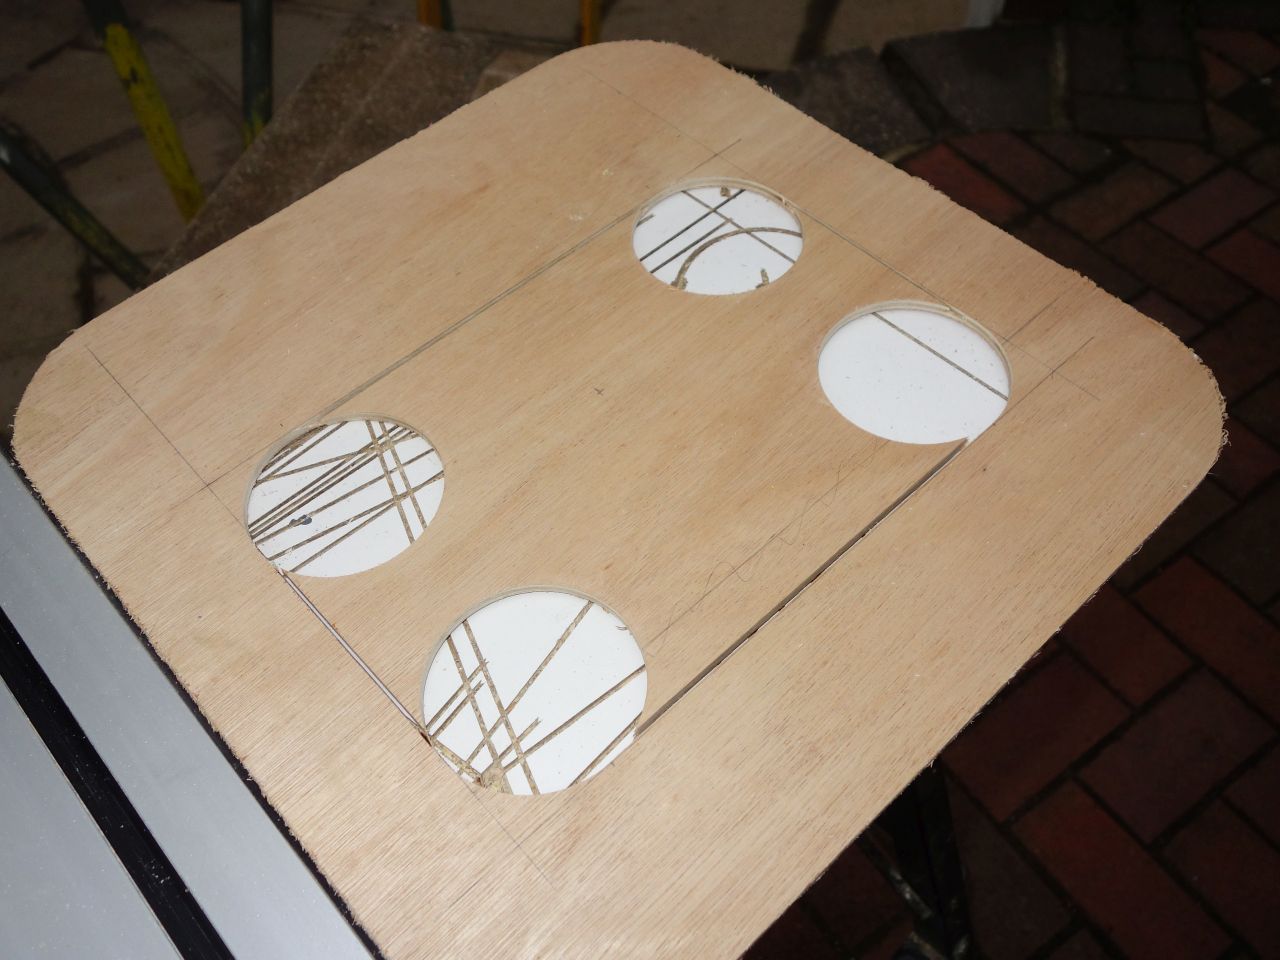 Hatch templates laid out